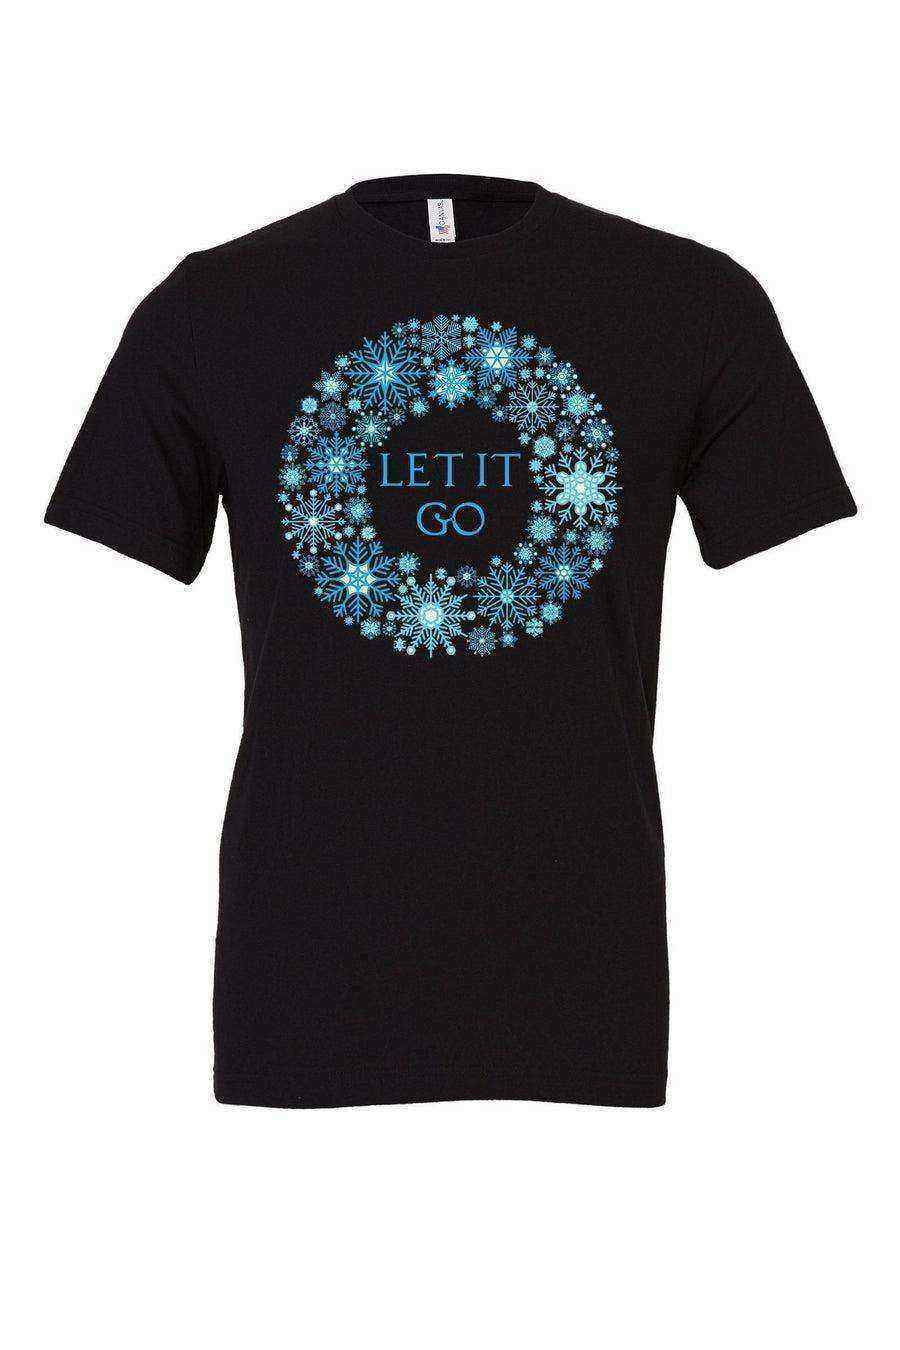 Toddler | Let It Go Tee - Dylan's Tees